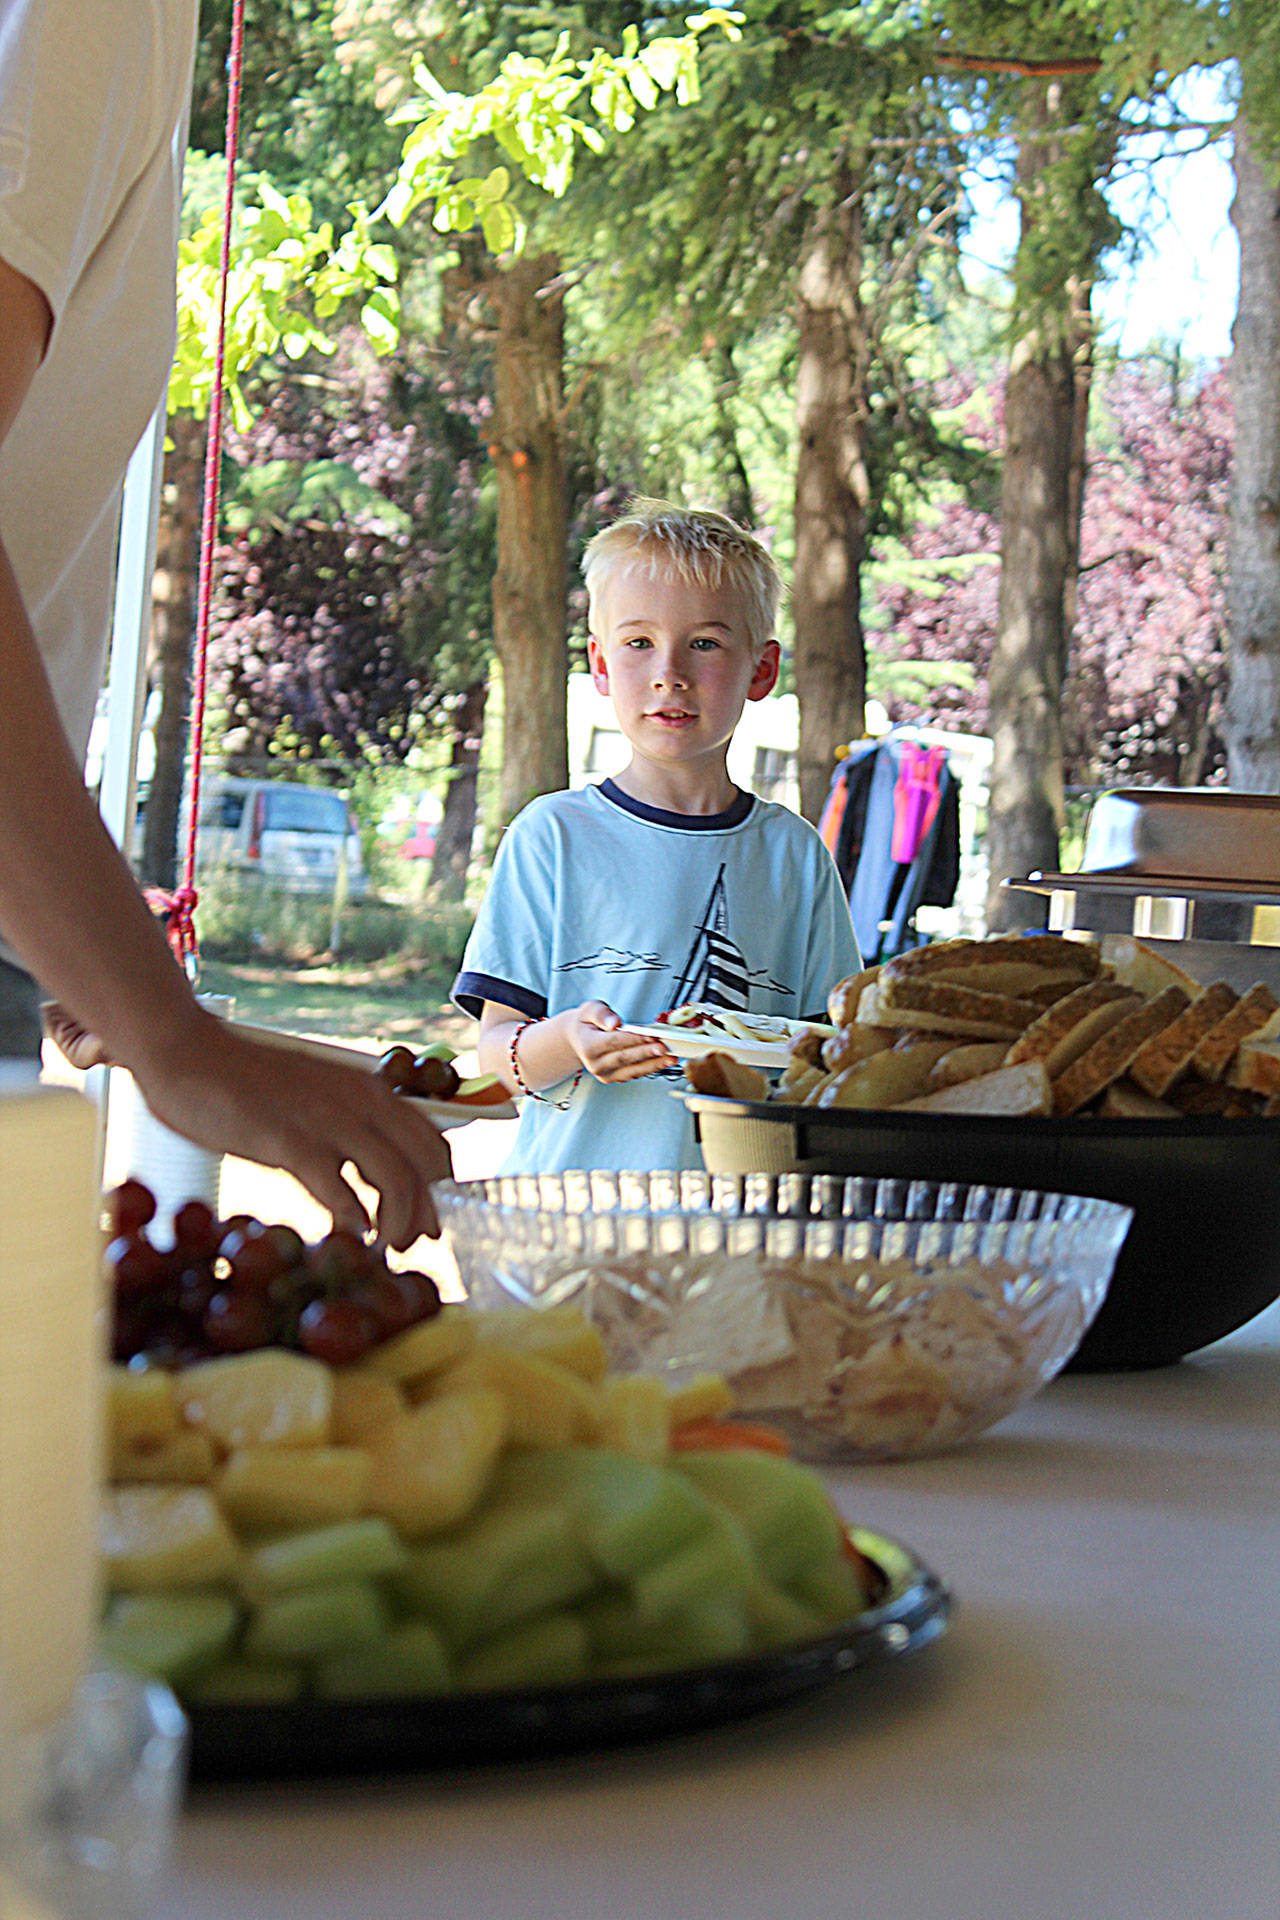 Free lunch for kids offered at Centennial Park